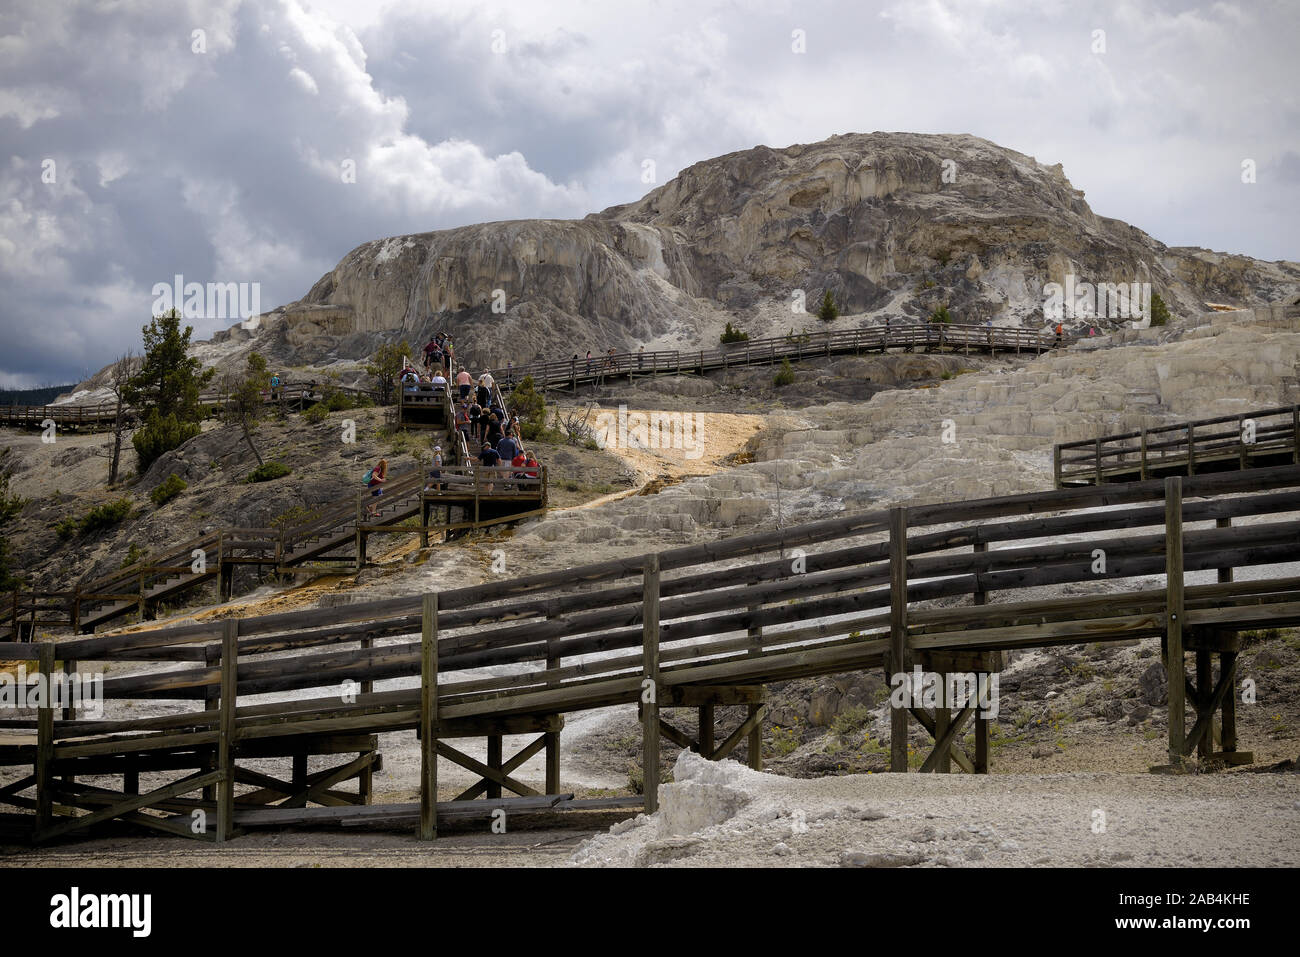 This wooden boardwalk takes Yellowstone National Park visitors to areas of the Mammoth Hot Springs Terraces. Stock Photo